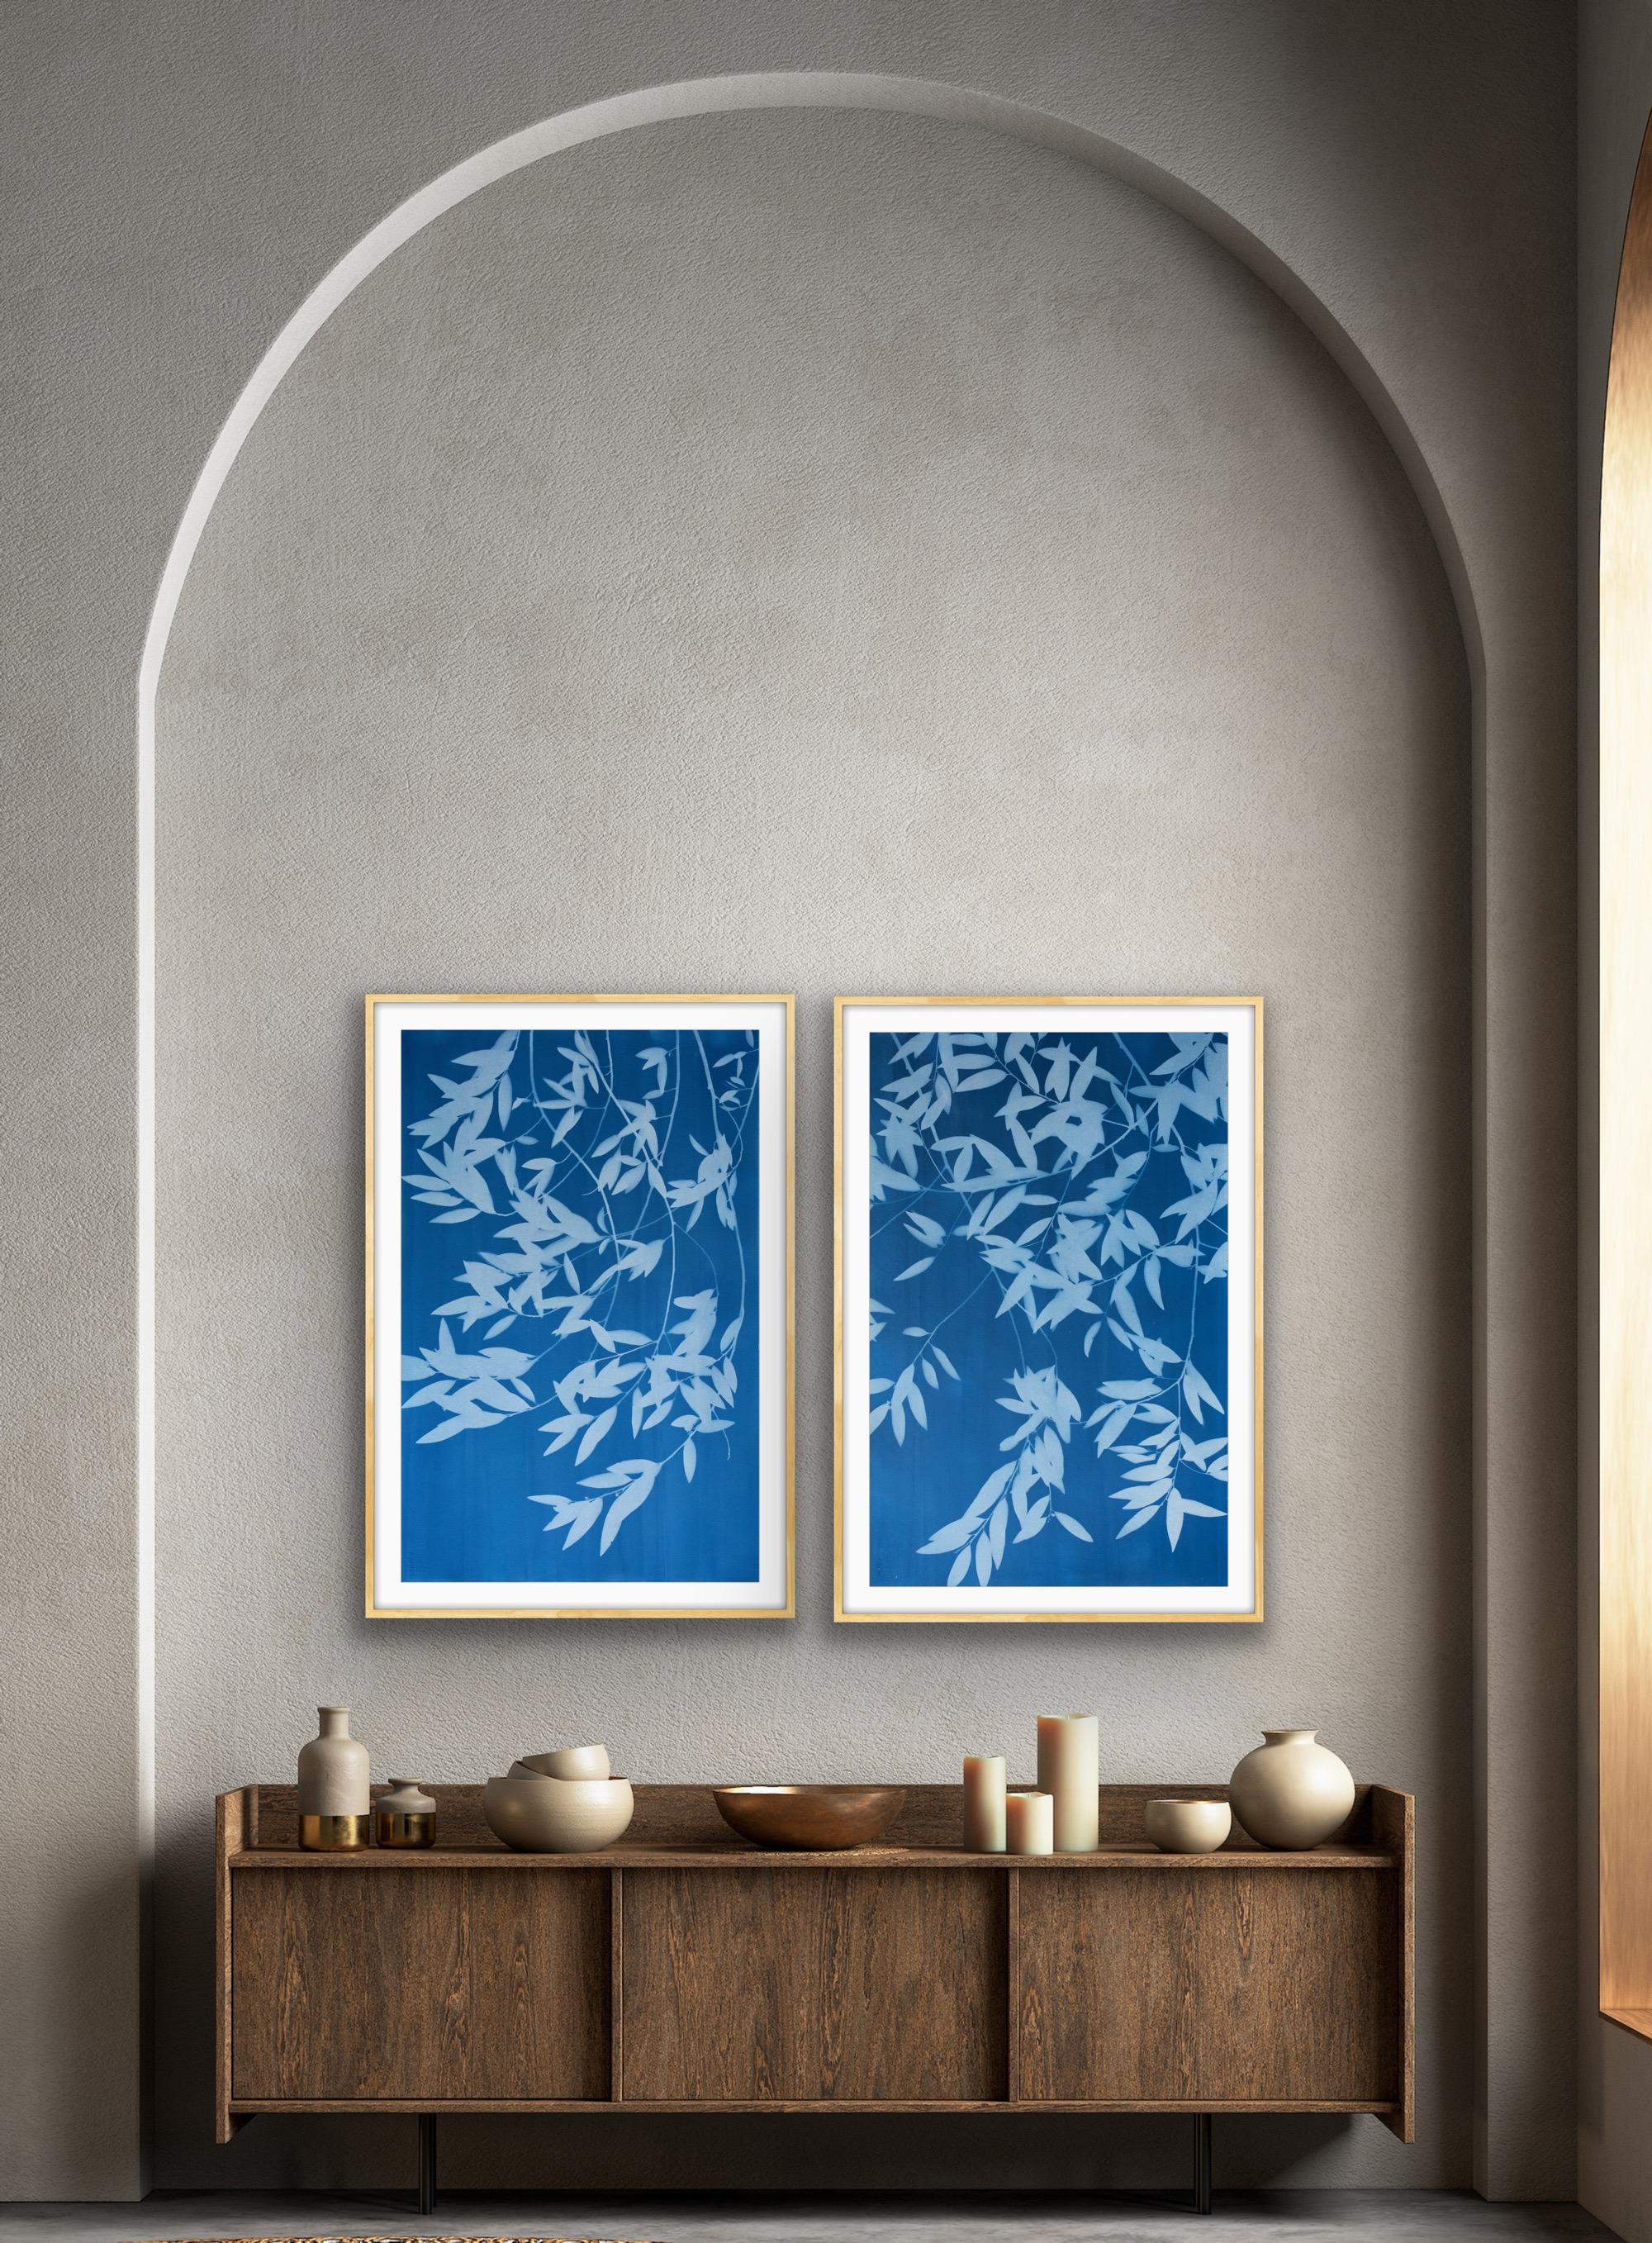 Night Laurel Diptych (Hand-printed cyanotype, 40 x 52 inches combined) For Sale 3